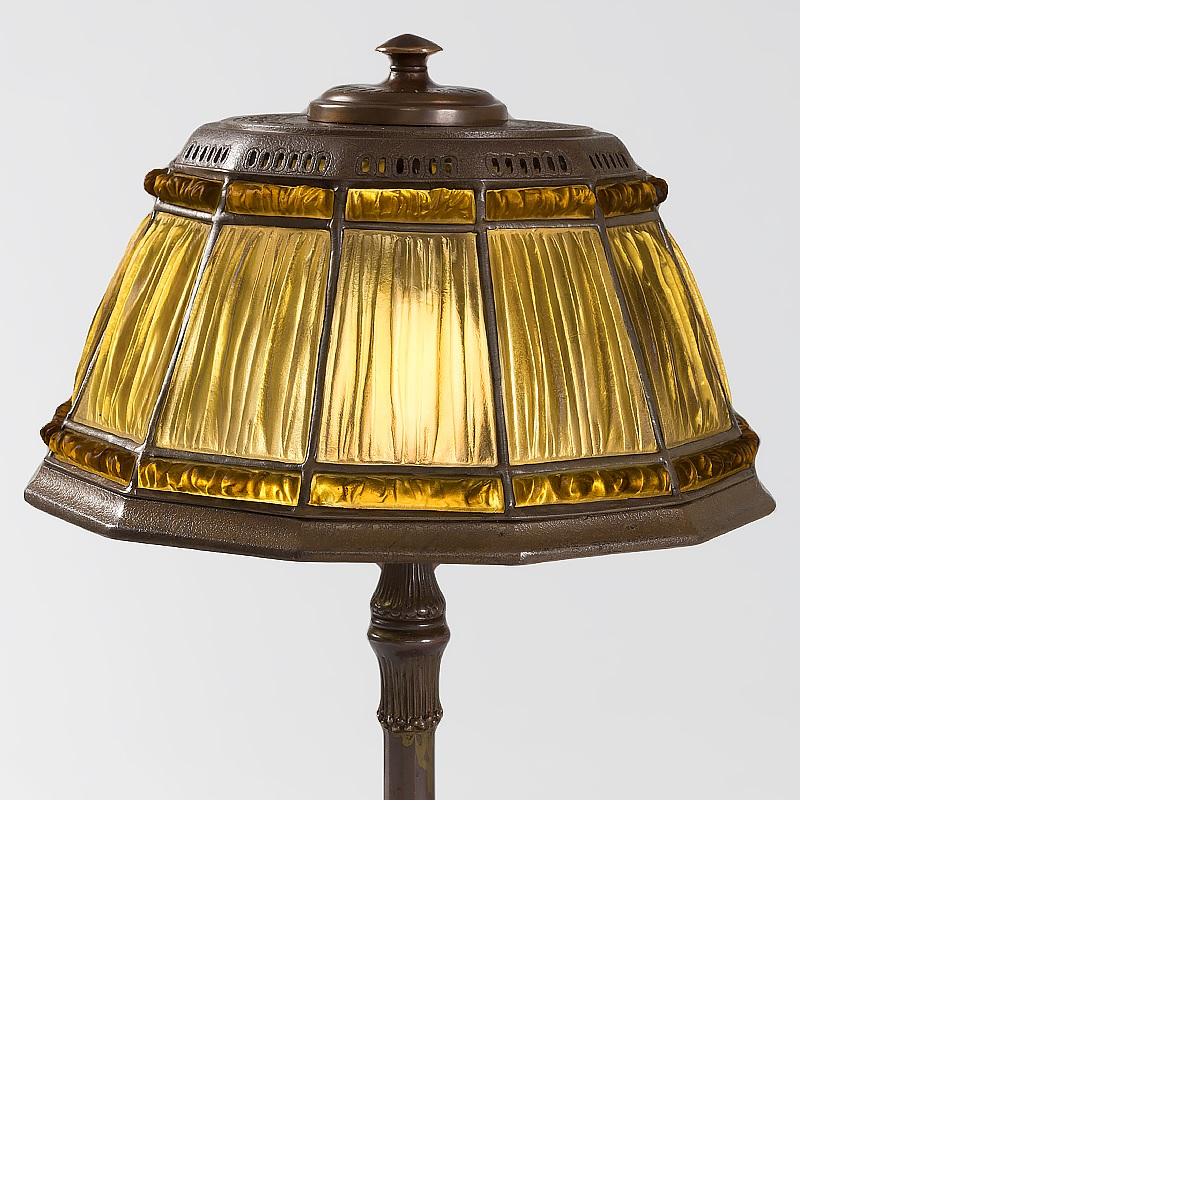 A Tiffany Studios New York glass bronze “Linenfold” lamp, featuring a Favrile glass golden yellow “Linenfold” shade with gilt leading. The shade sits atop a patinated bronze base, circa 1900.

A similar lamp is pictured in: Alastair Duncan,